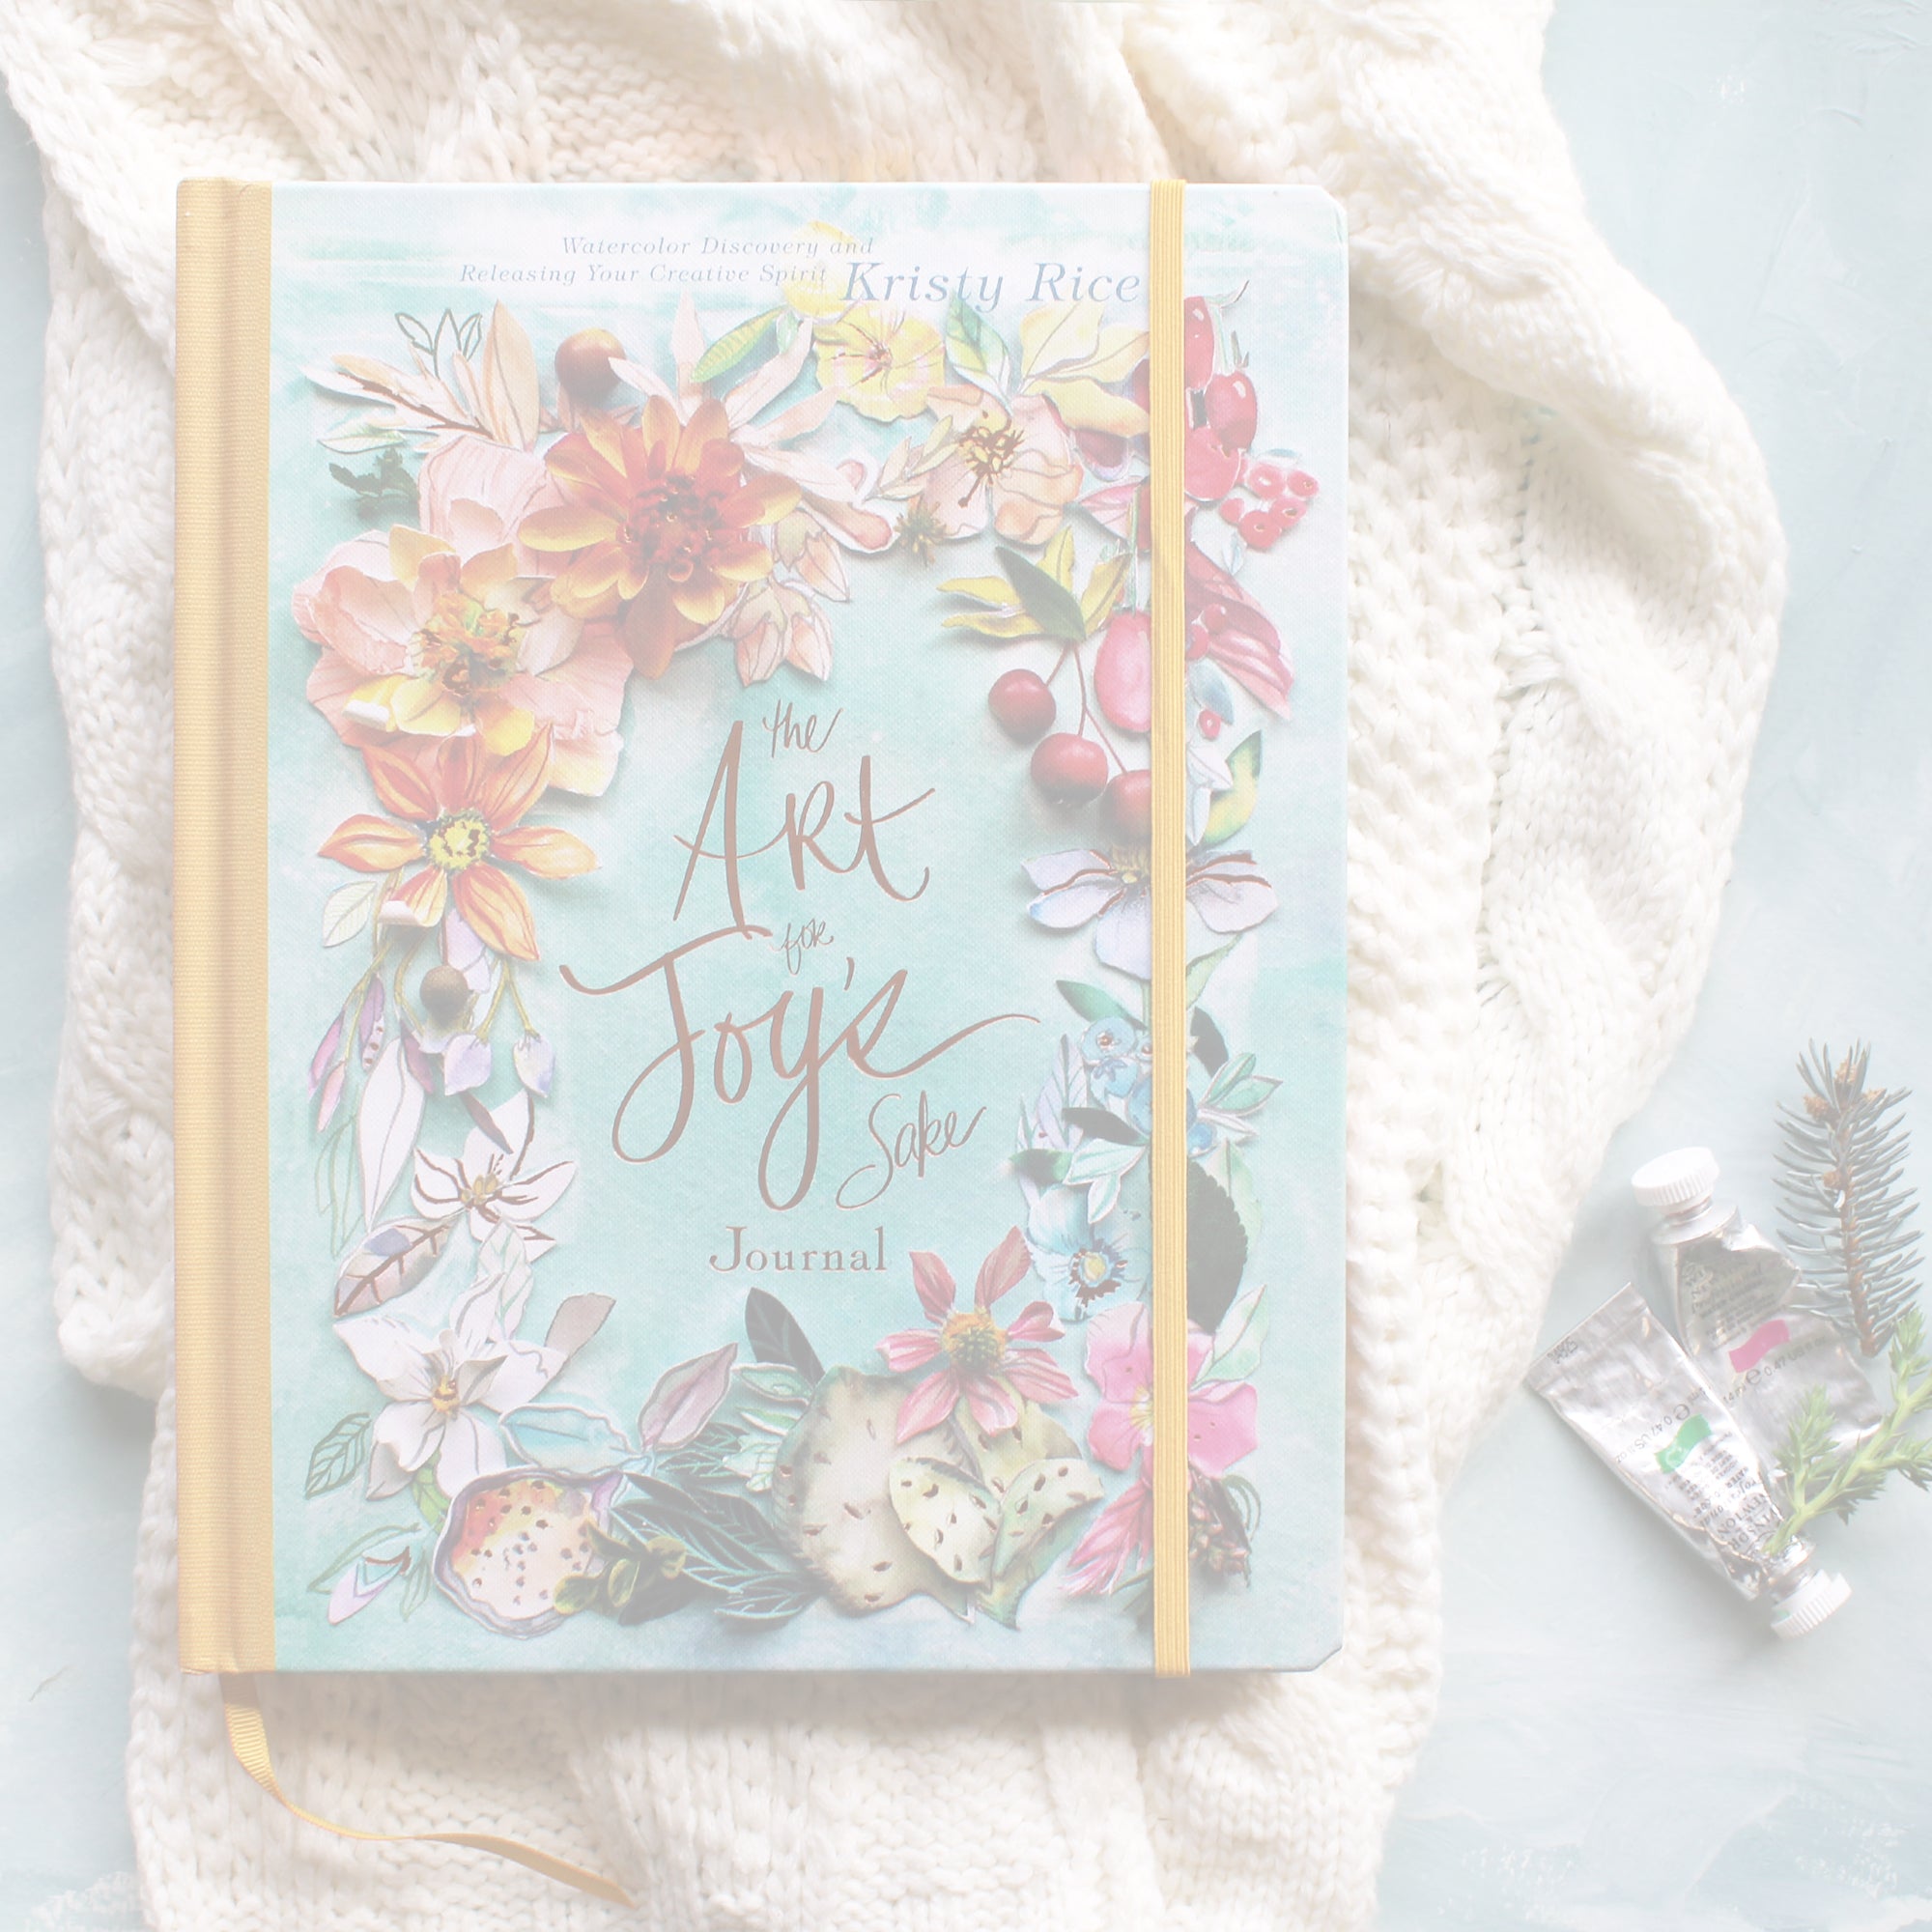 Art for Joy's Sake Journal & Watercolor Notecard Bundle - Unique Shopping  for Artistic Gifts